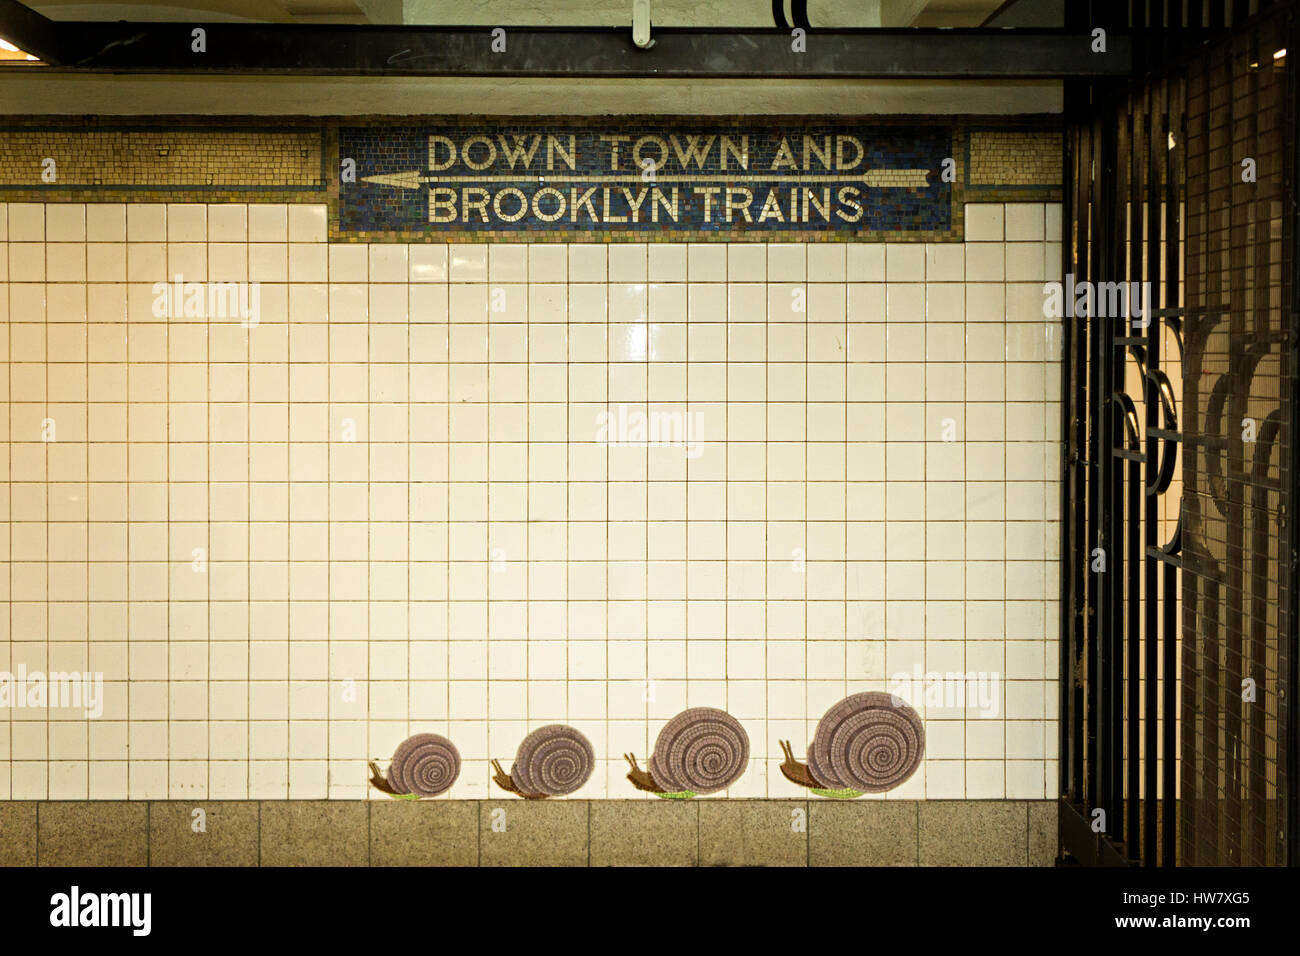 Public art on display at the Fifth Avenue and 59th street R line subway station in New York City. Stock Photo